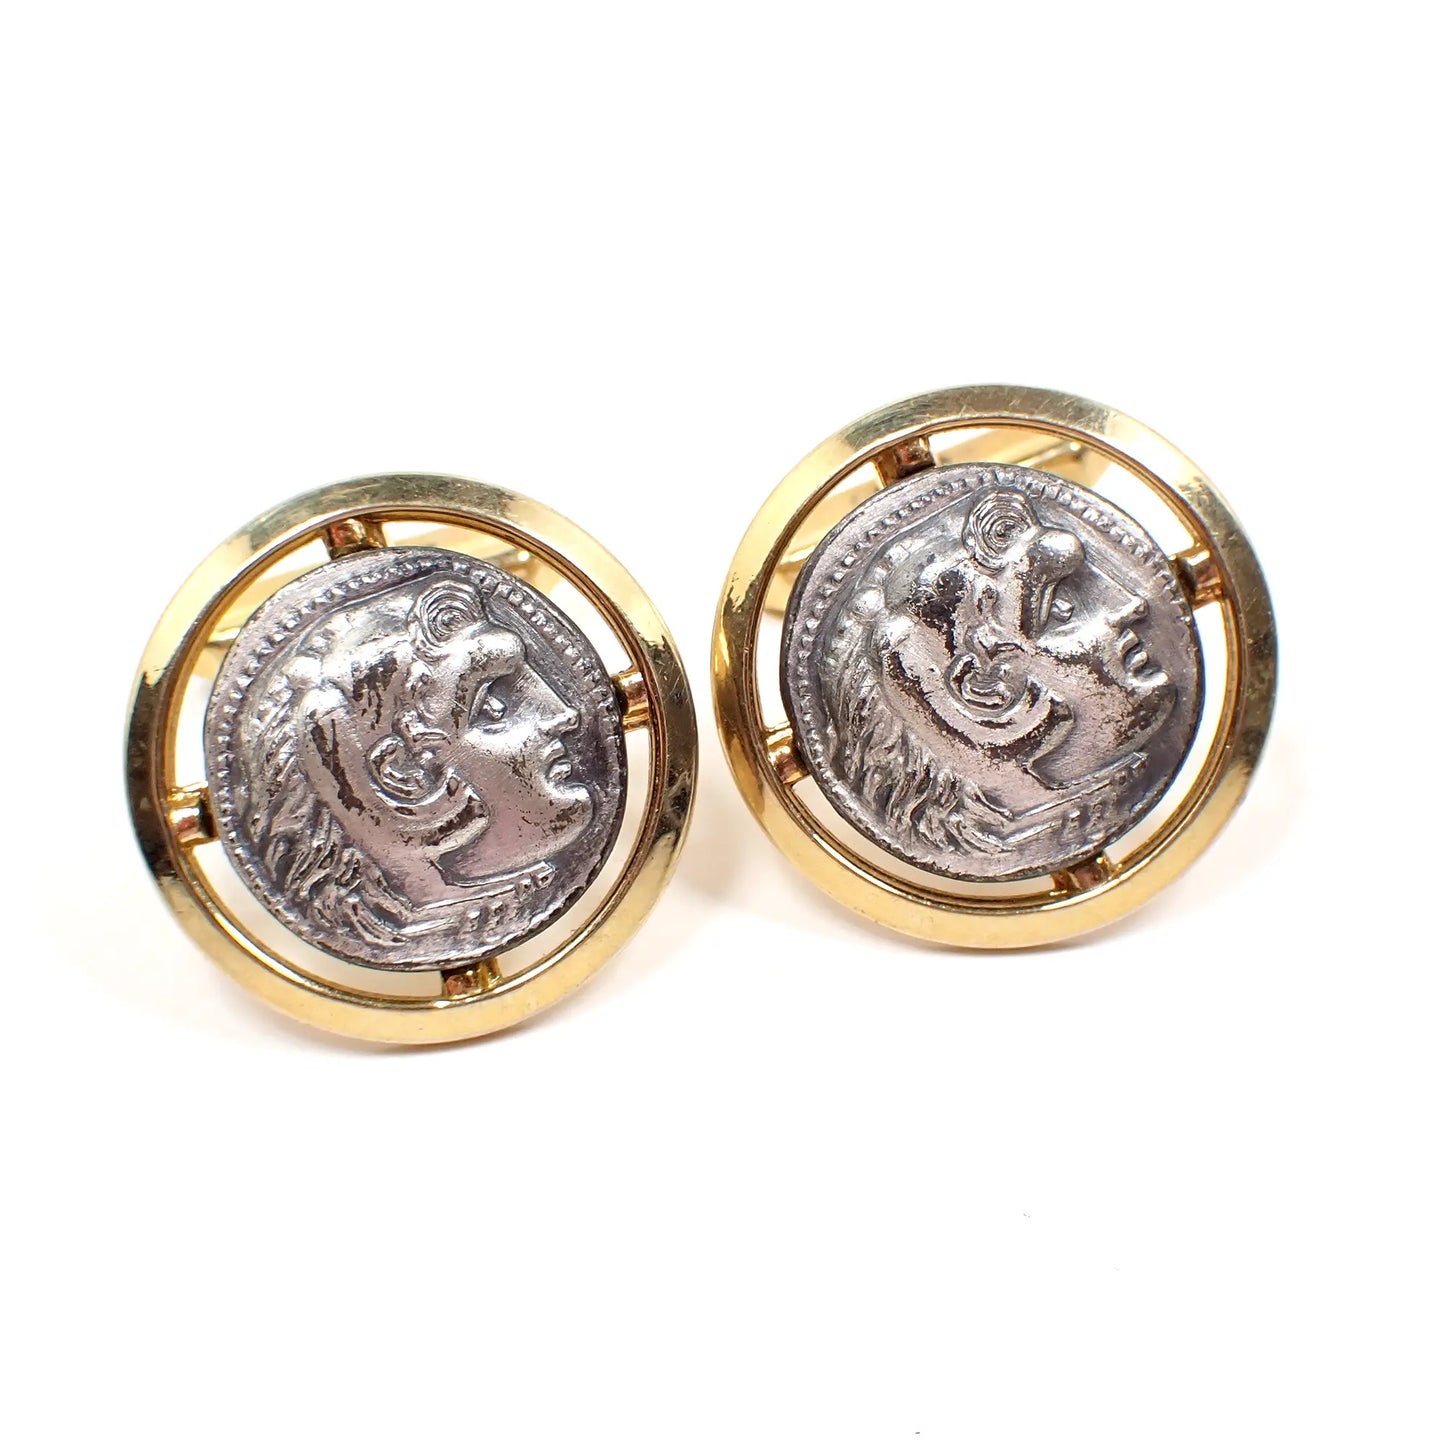 Front view of the Mid Century vintage two tone metal cameo cufflinks. They are round and have light pewter gray fronts with a raised design of Alexander the Great. The outer edge has a cut out design and gold tone color metal.